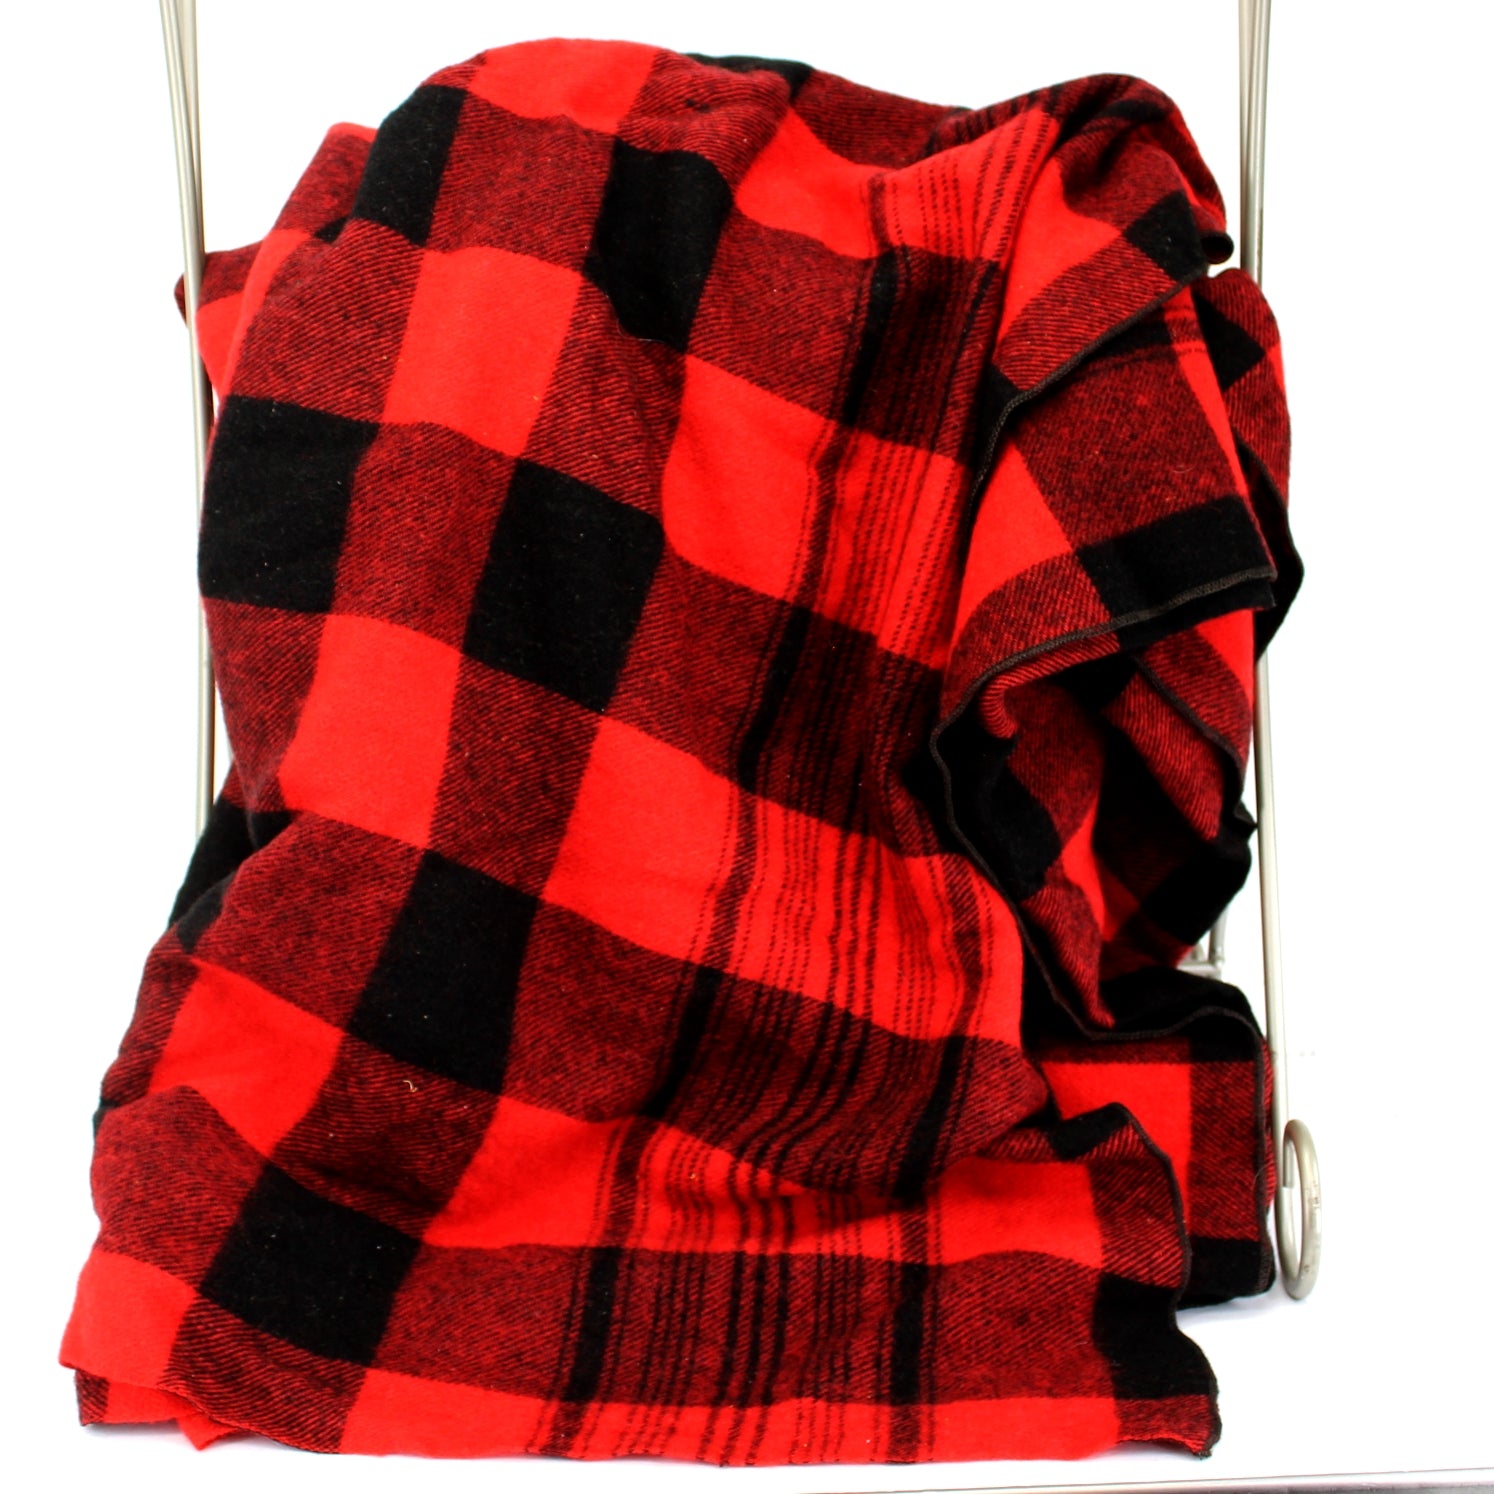 Double Length Wool Blanket Cabin Camp Red Black Check 67" X 154" soft flexible wool fabric